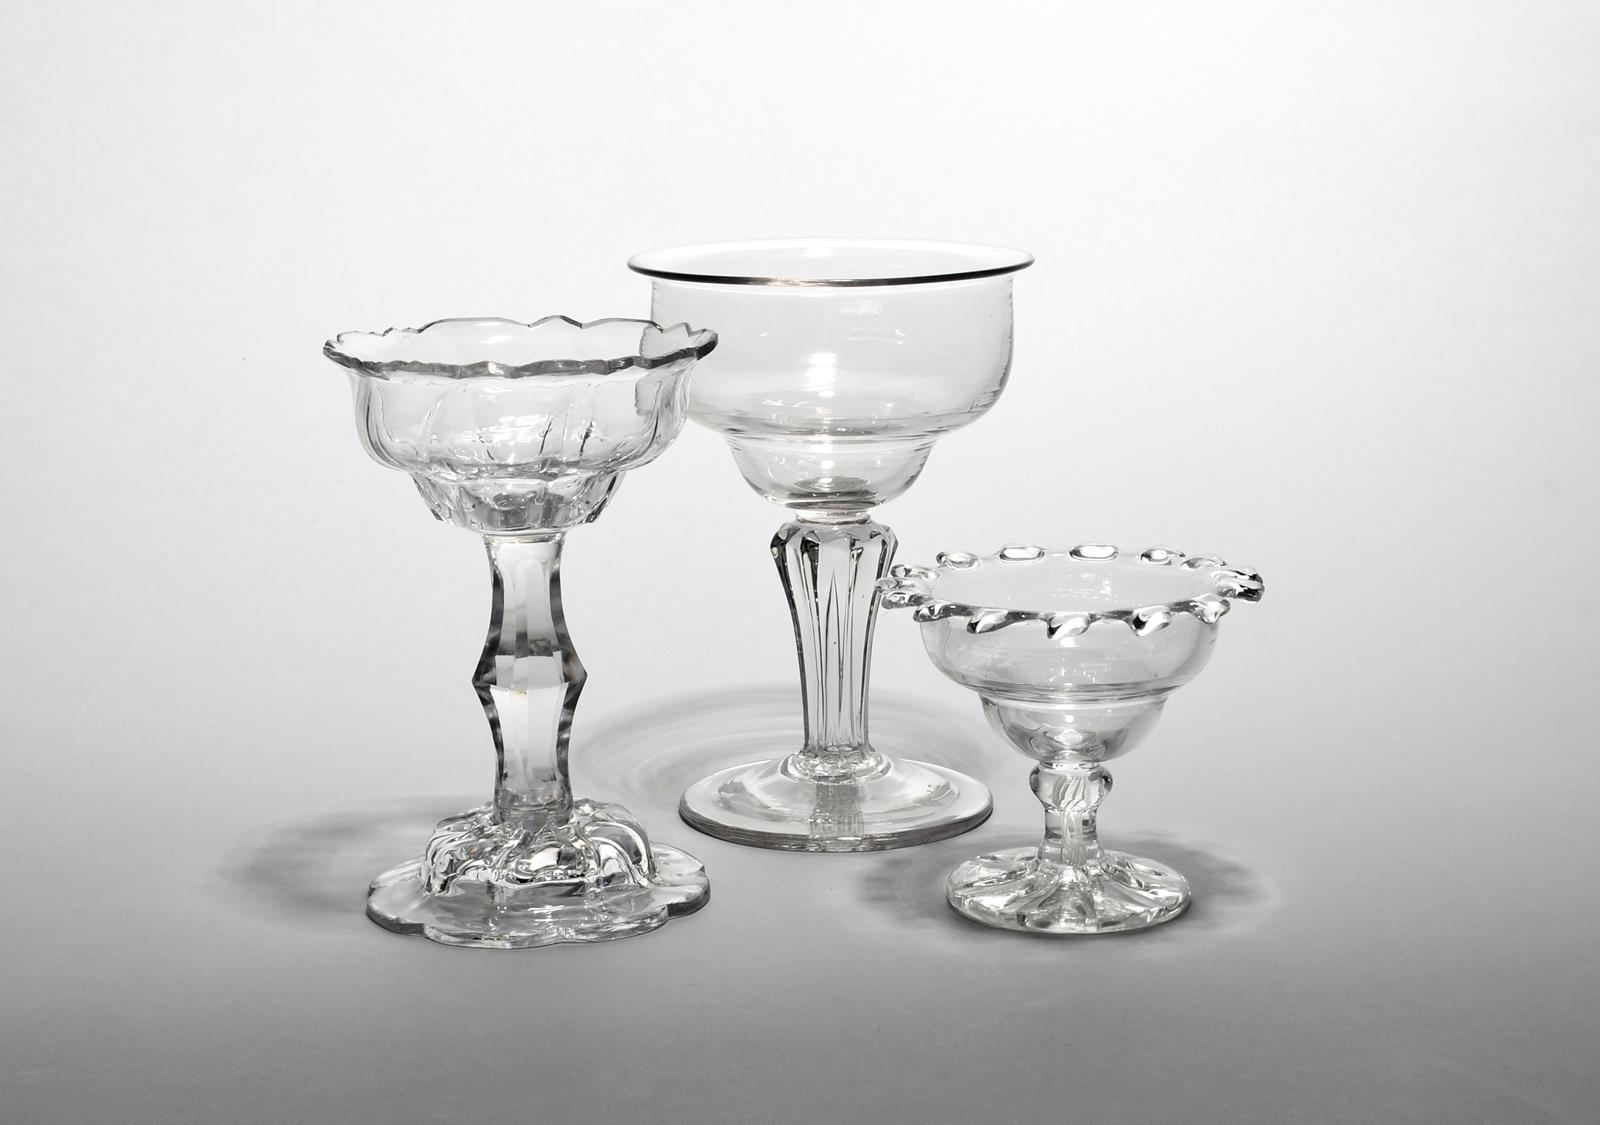 Three sweetmeat glasses c.1770 and later, the smallest with an ogee bowl with pinched rim above a